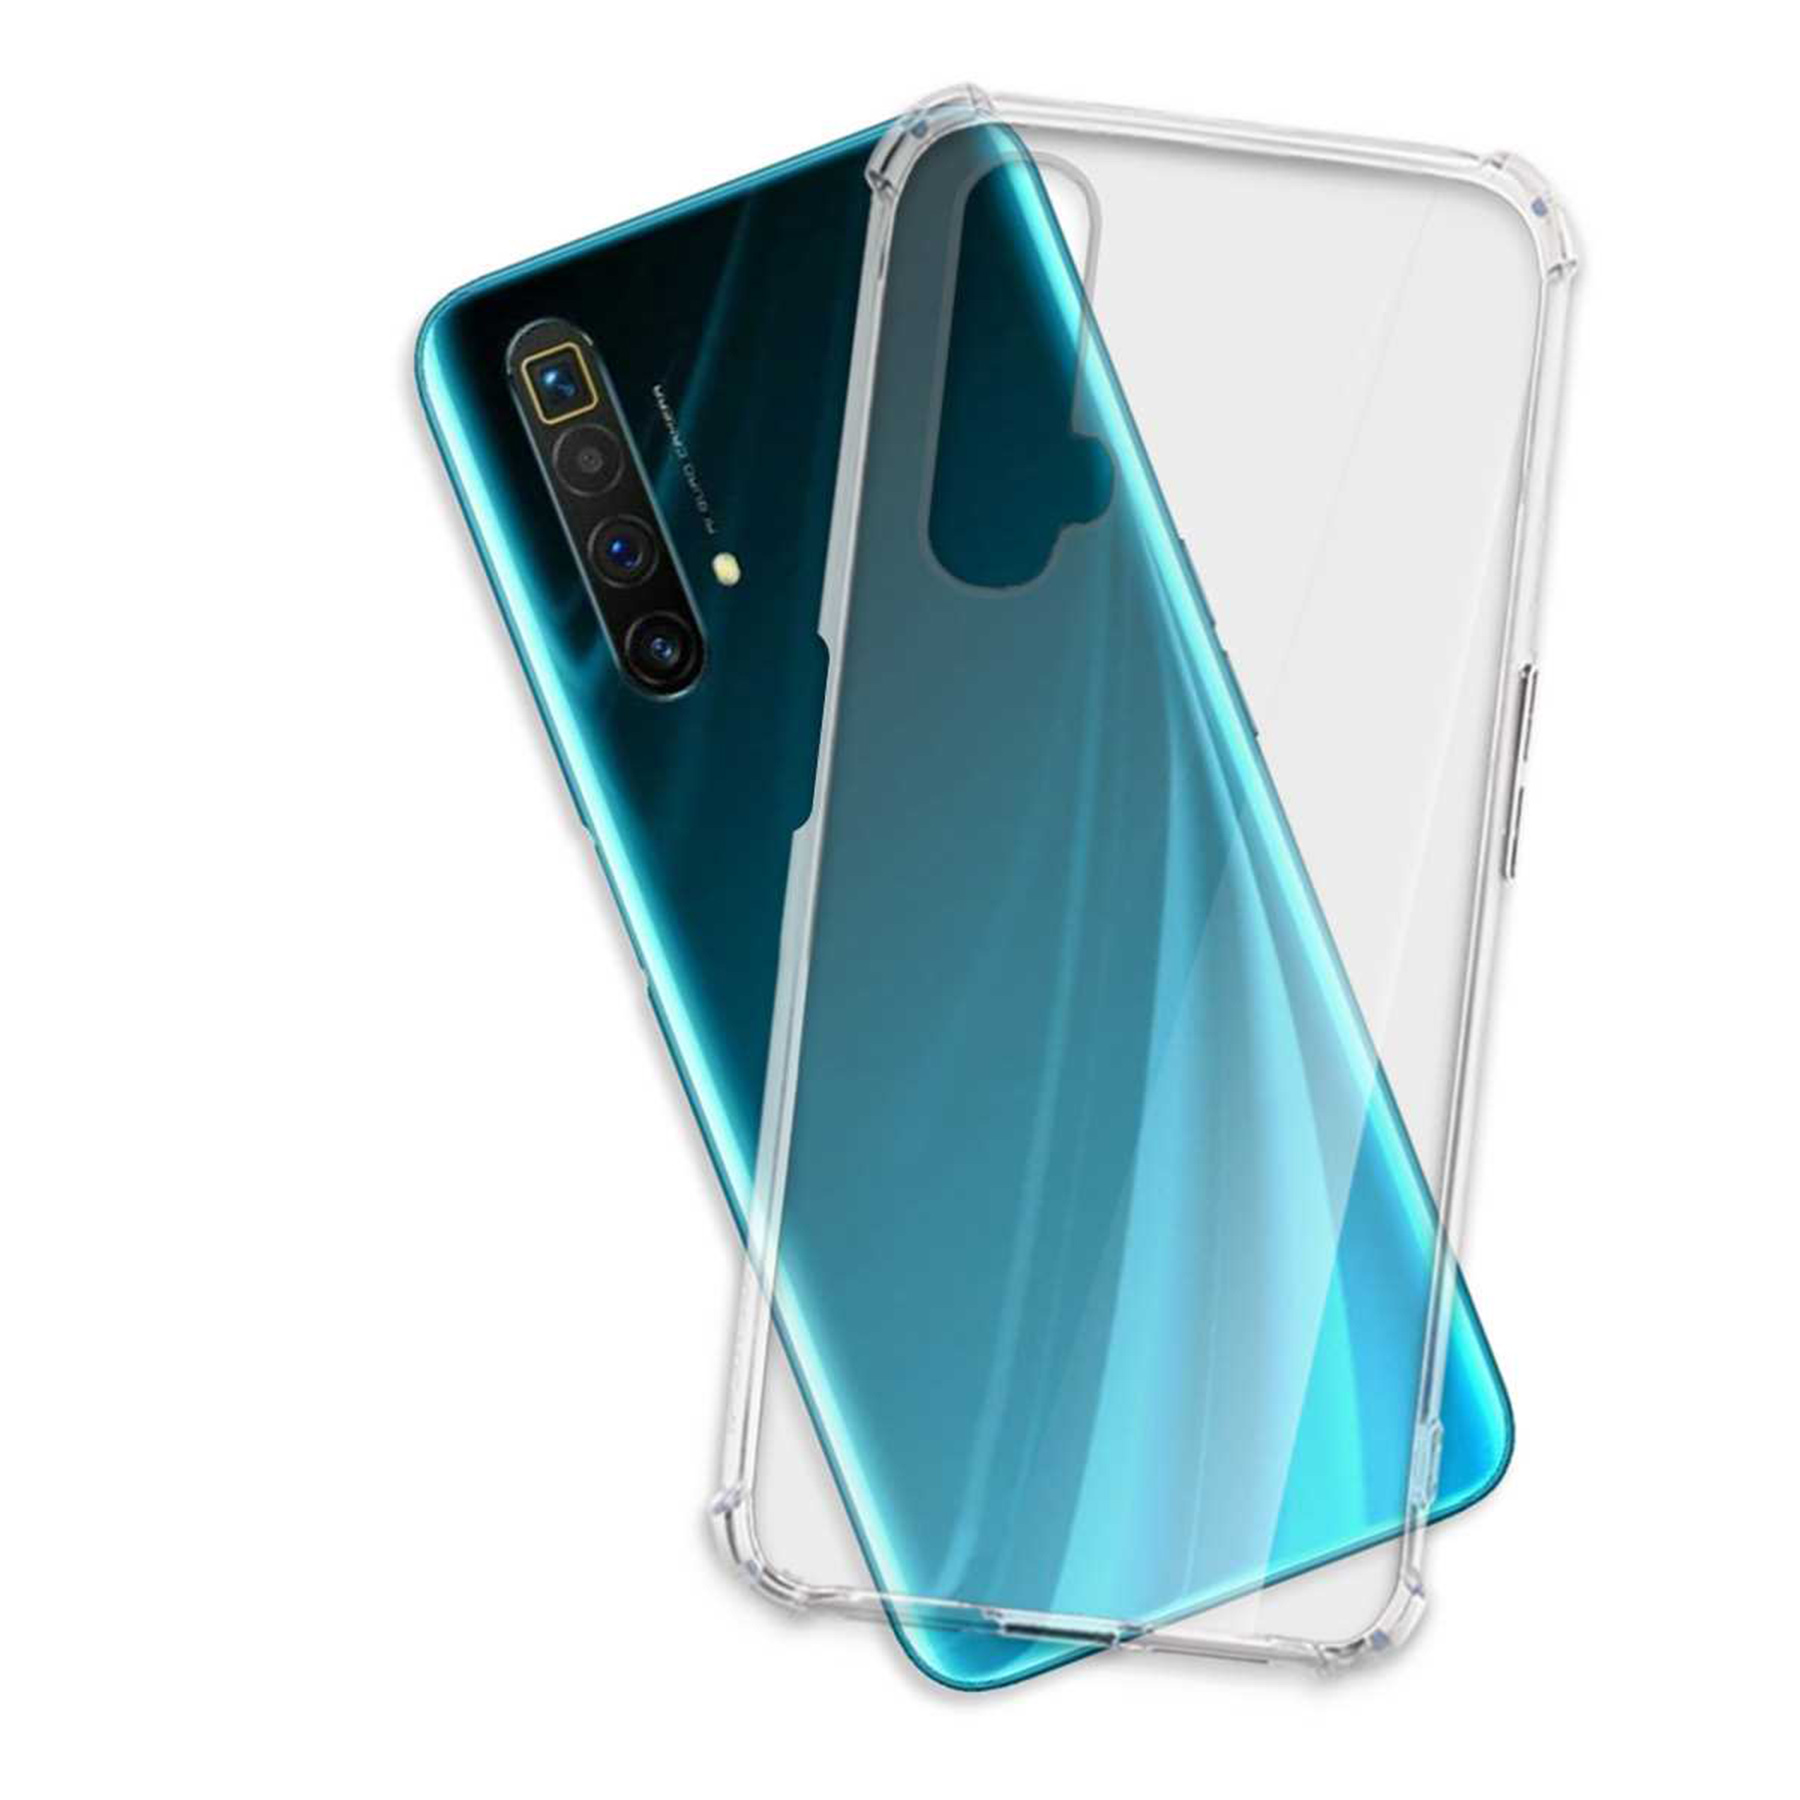 Backcover, Transparent ENERGY Case, X50 X3 5G, Realme, 5G, X3, MORE MTB SuperZoom, X50m Armor Clear